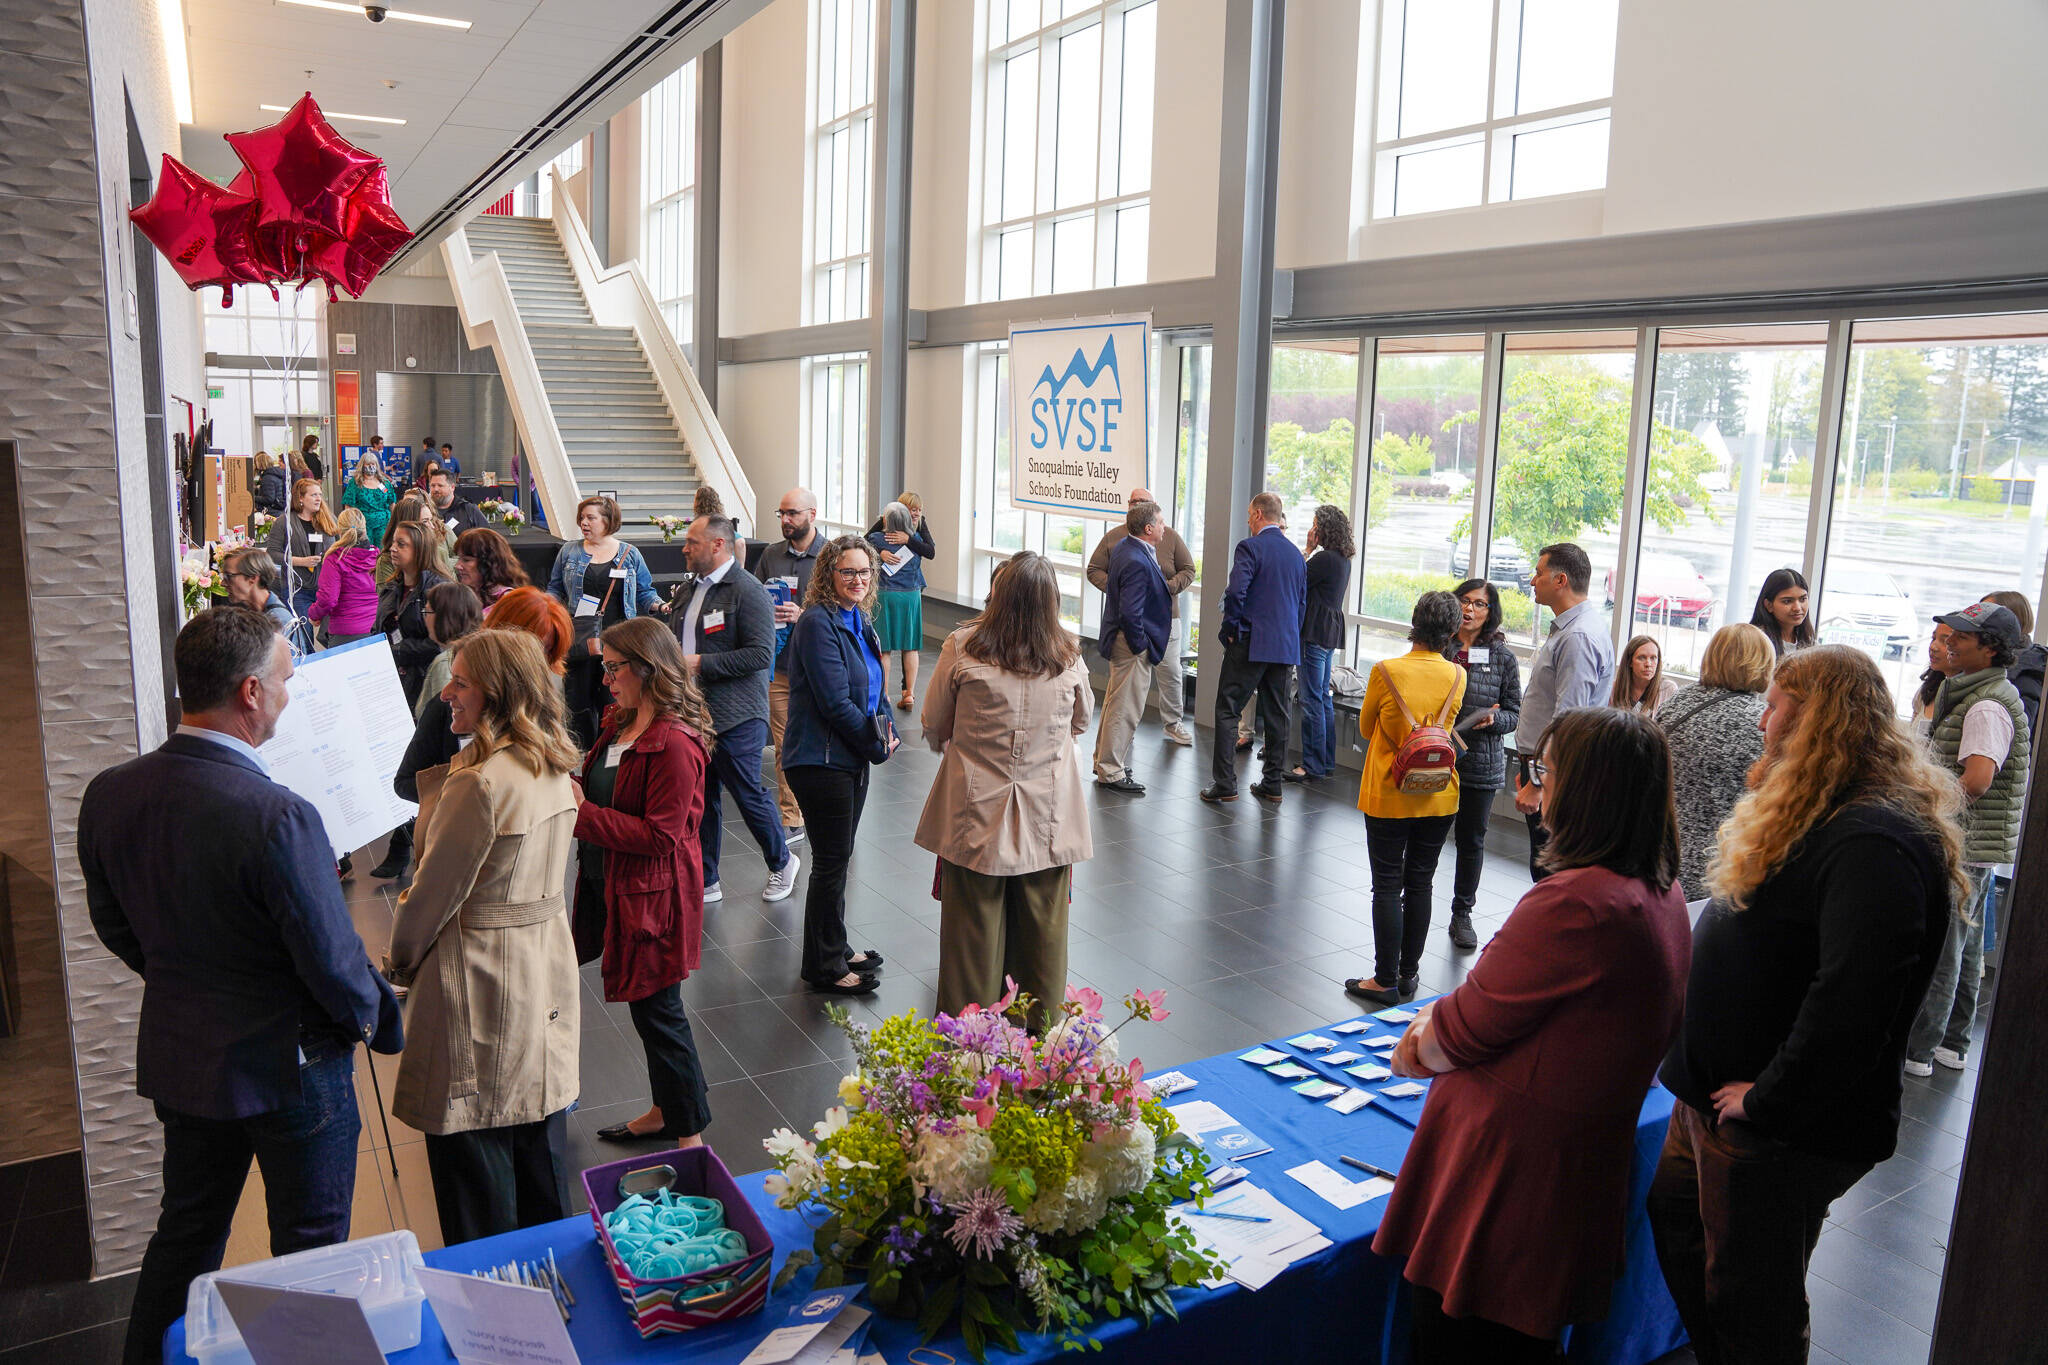 Attendees at the Snoqualmie Valley Schools Foundation annual fundraiser on April 27. Photo courtesy of Snoqualmie Valley School District